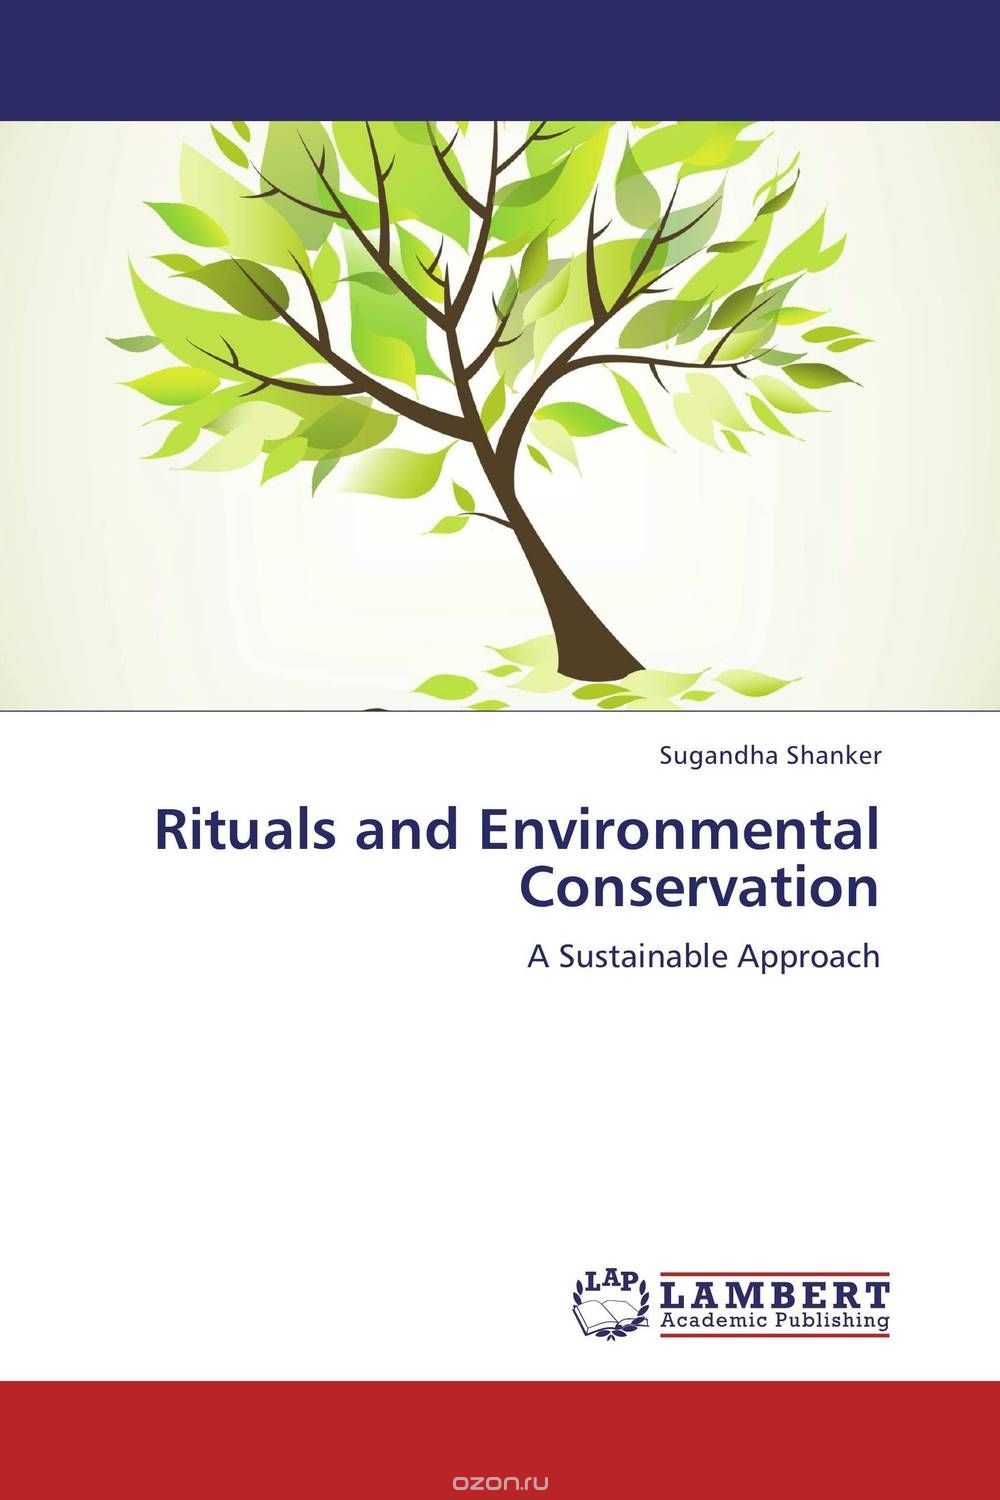 Rituals and Environmental Conservation